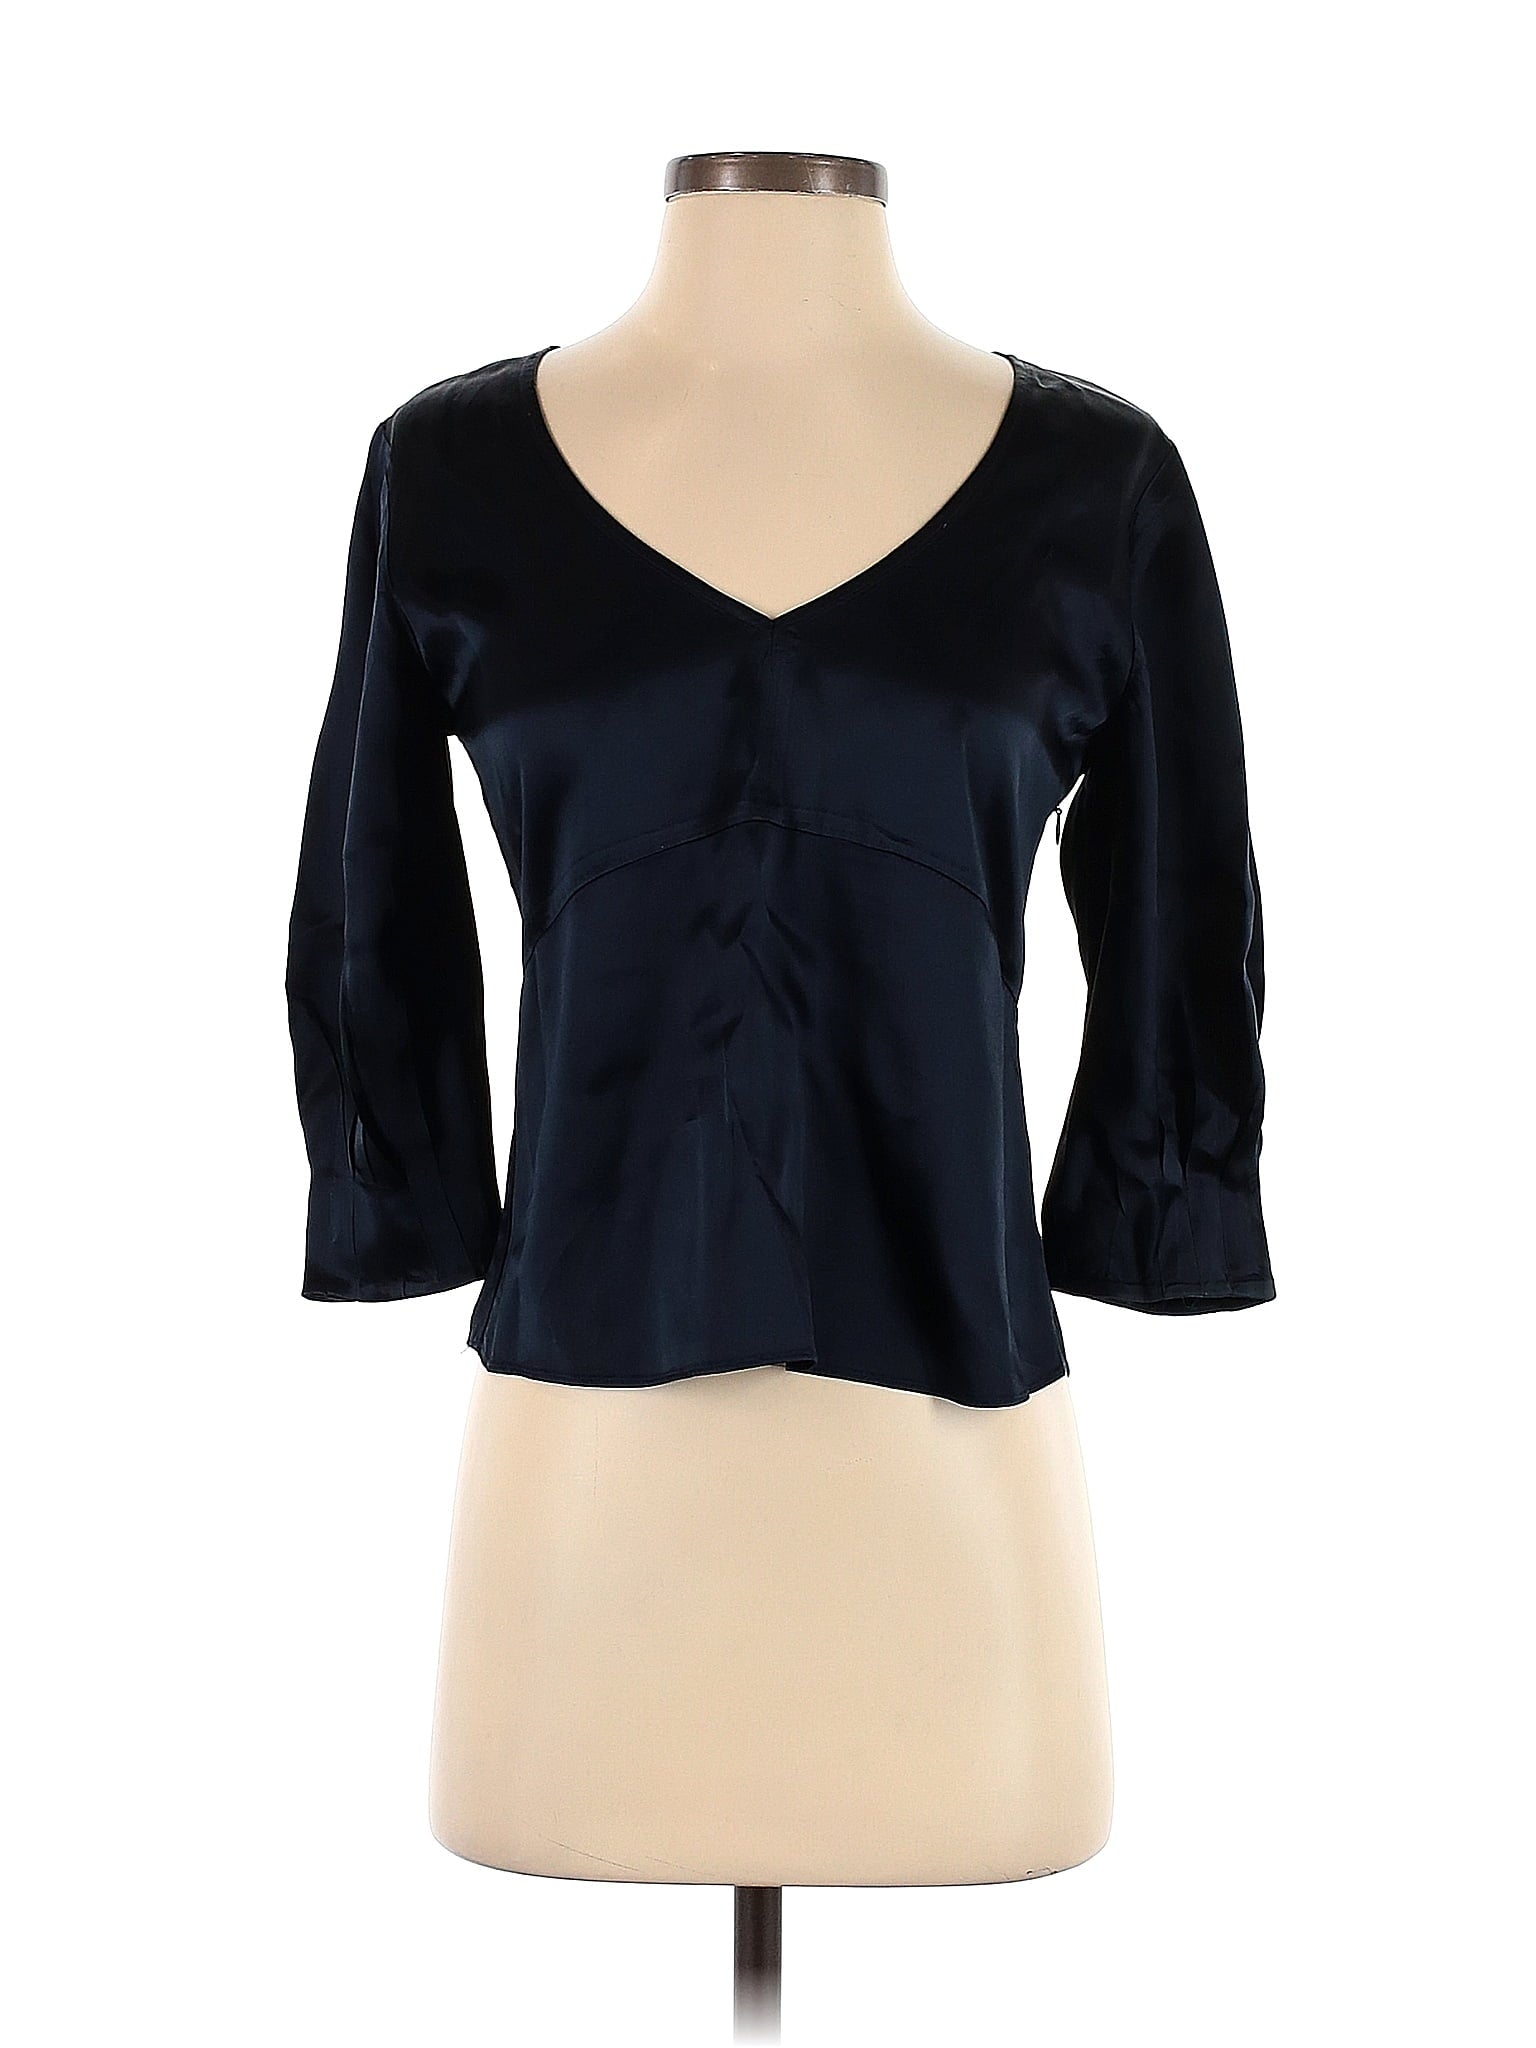 3/4 Sleeve Blouse size - S